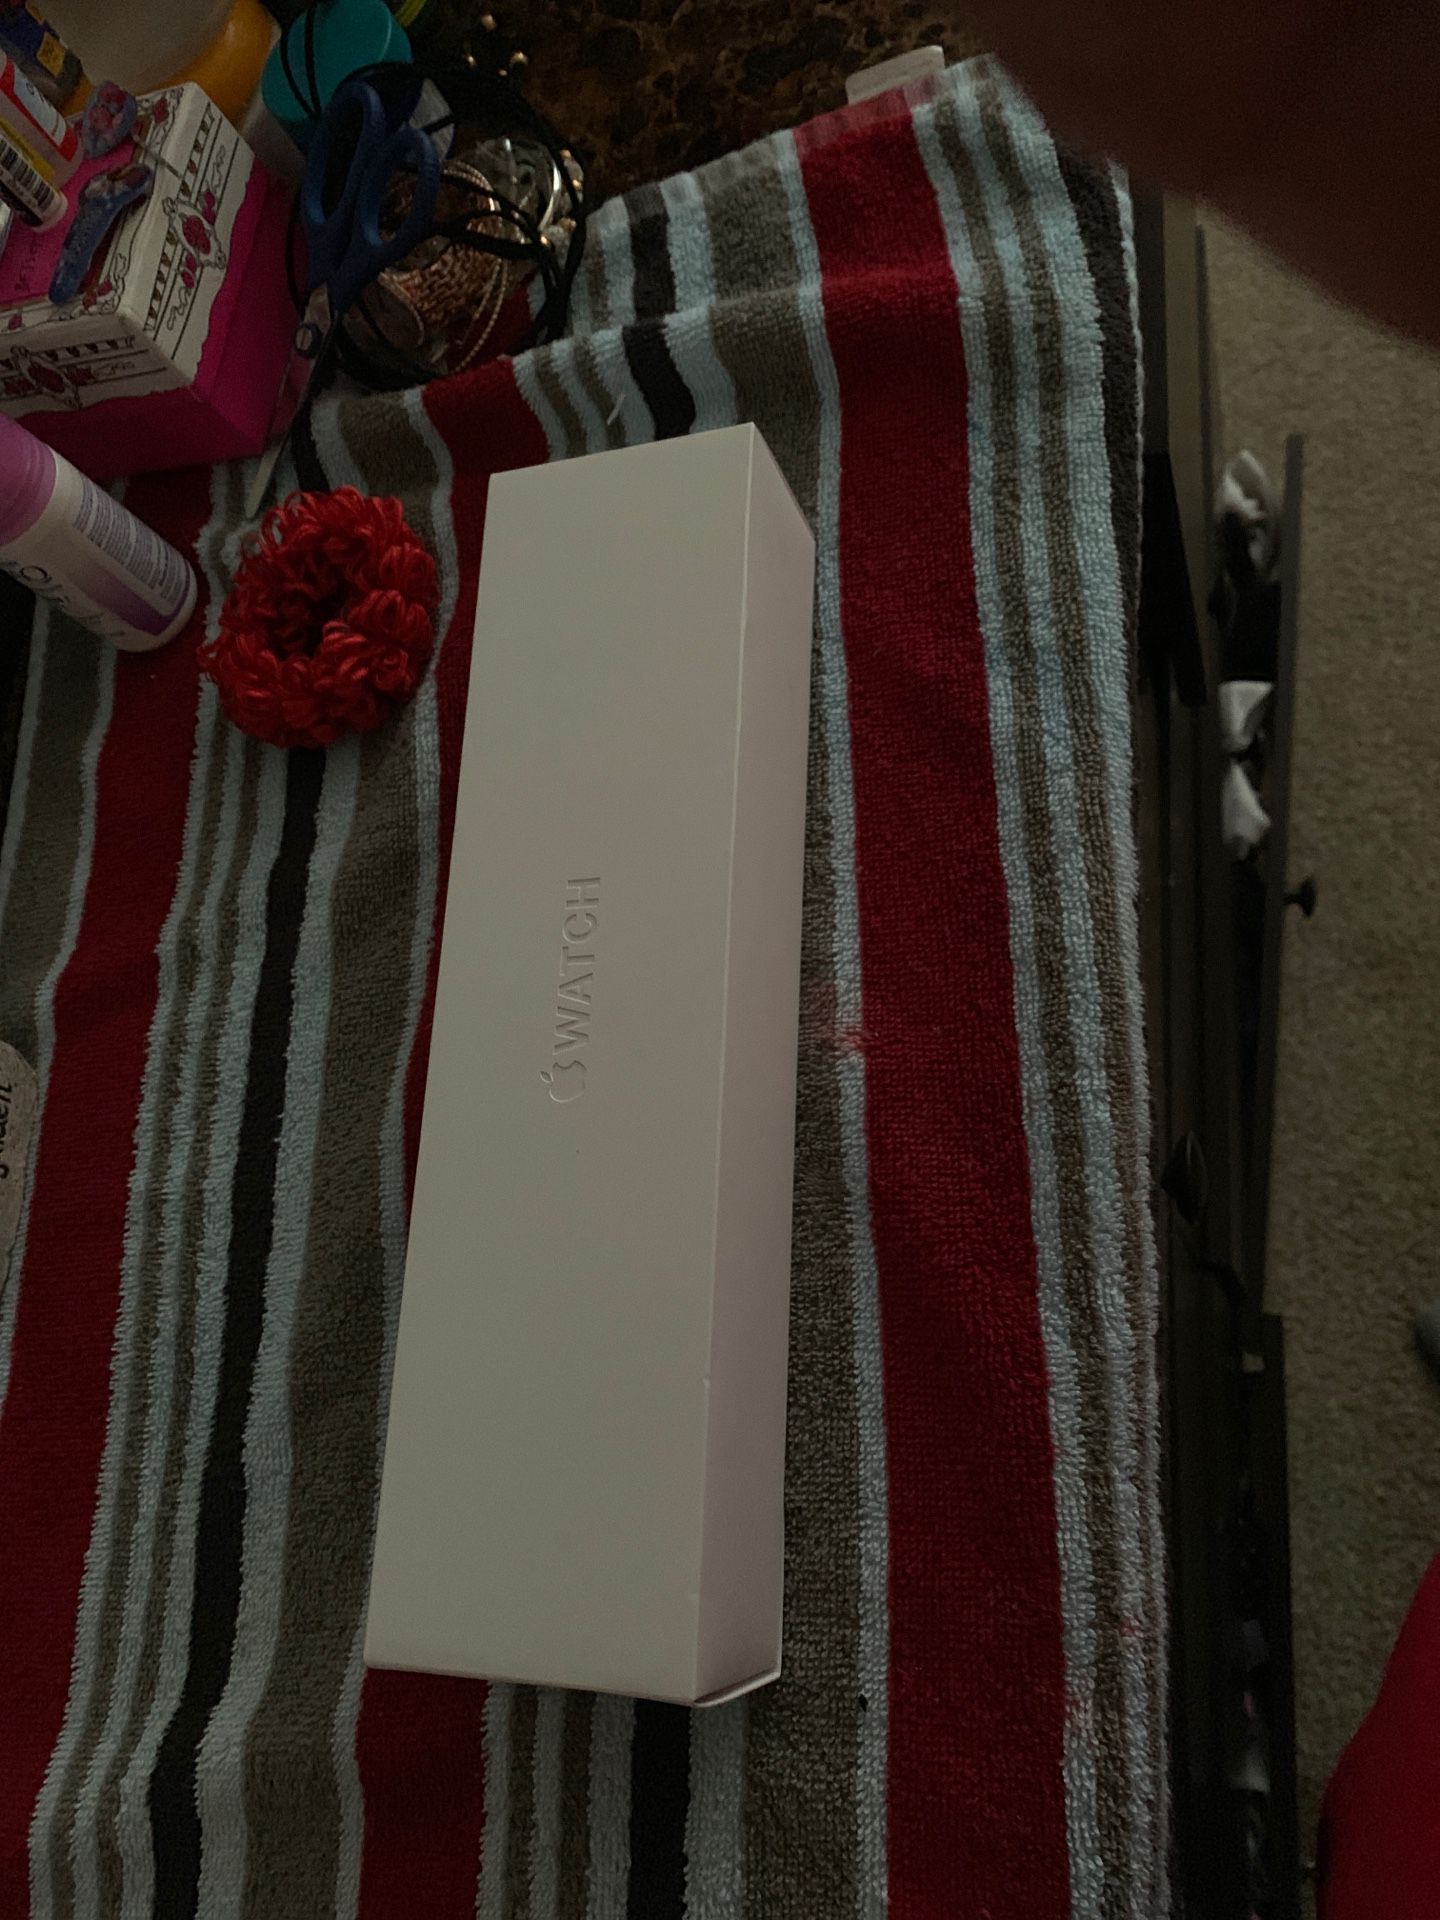 Brand new Apple Watch series 4 / 40 mm (gps + cell)